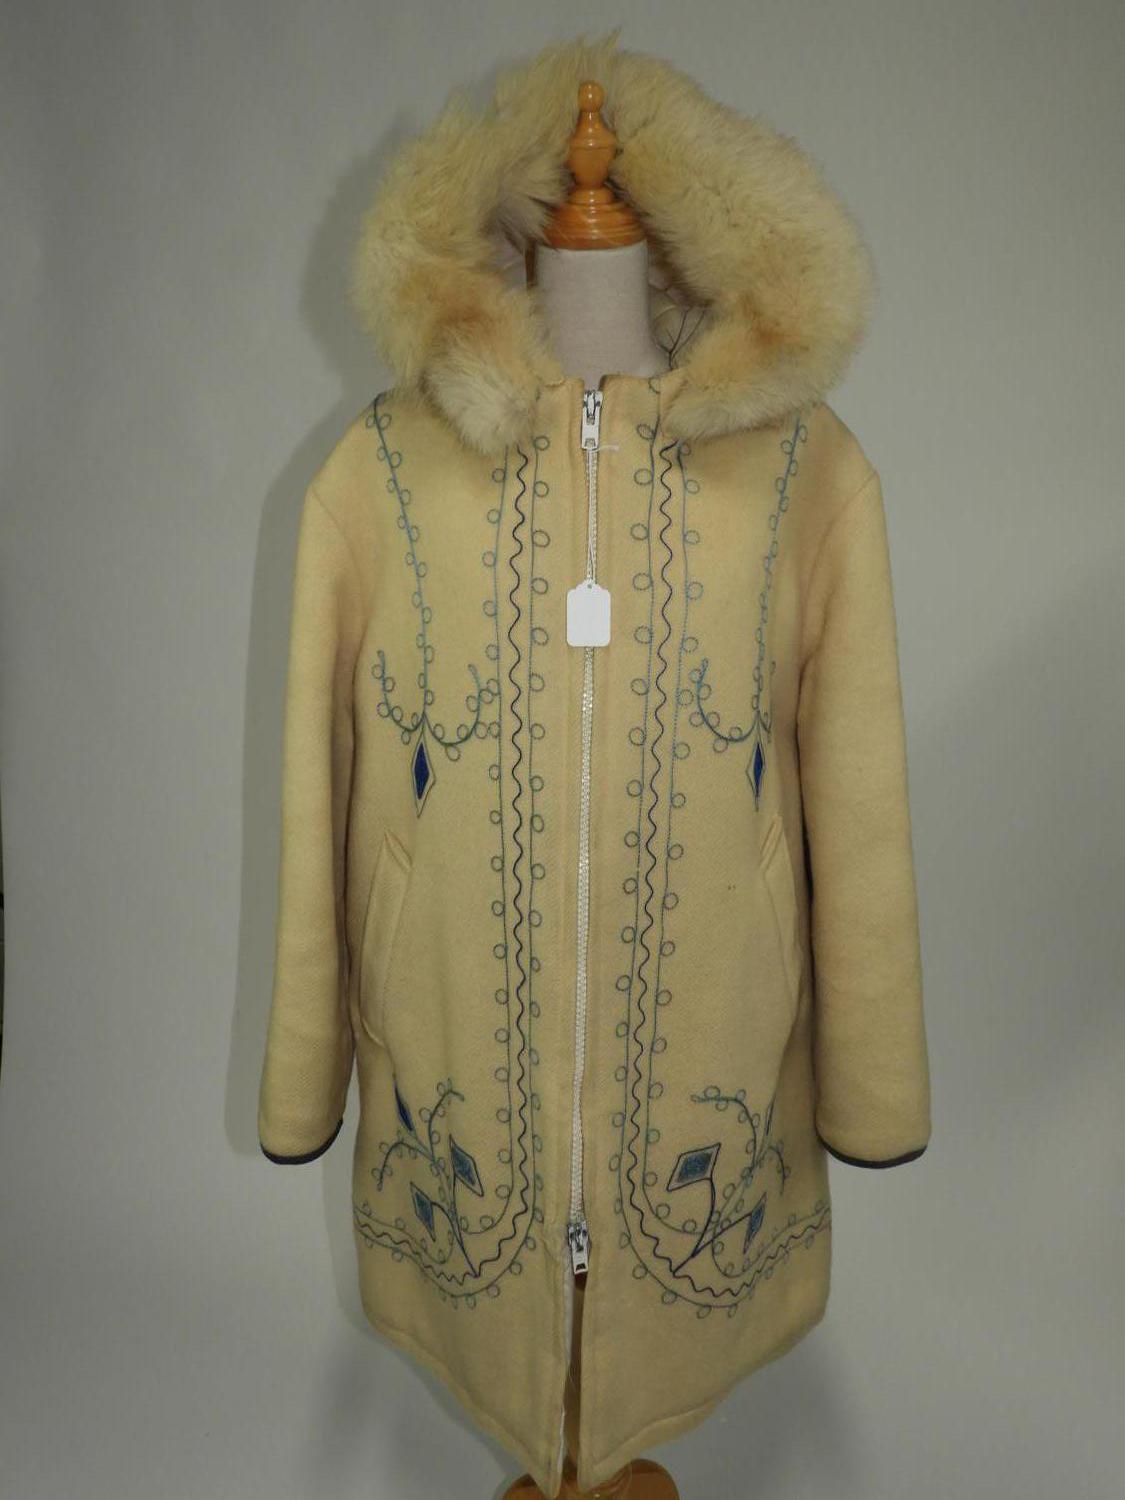 Murrays Auctioneers - Lot 129: Hudson's Bay wool embroidered coat with ...